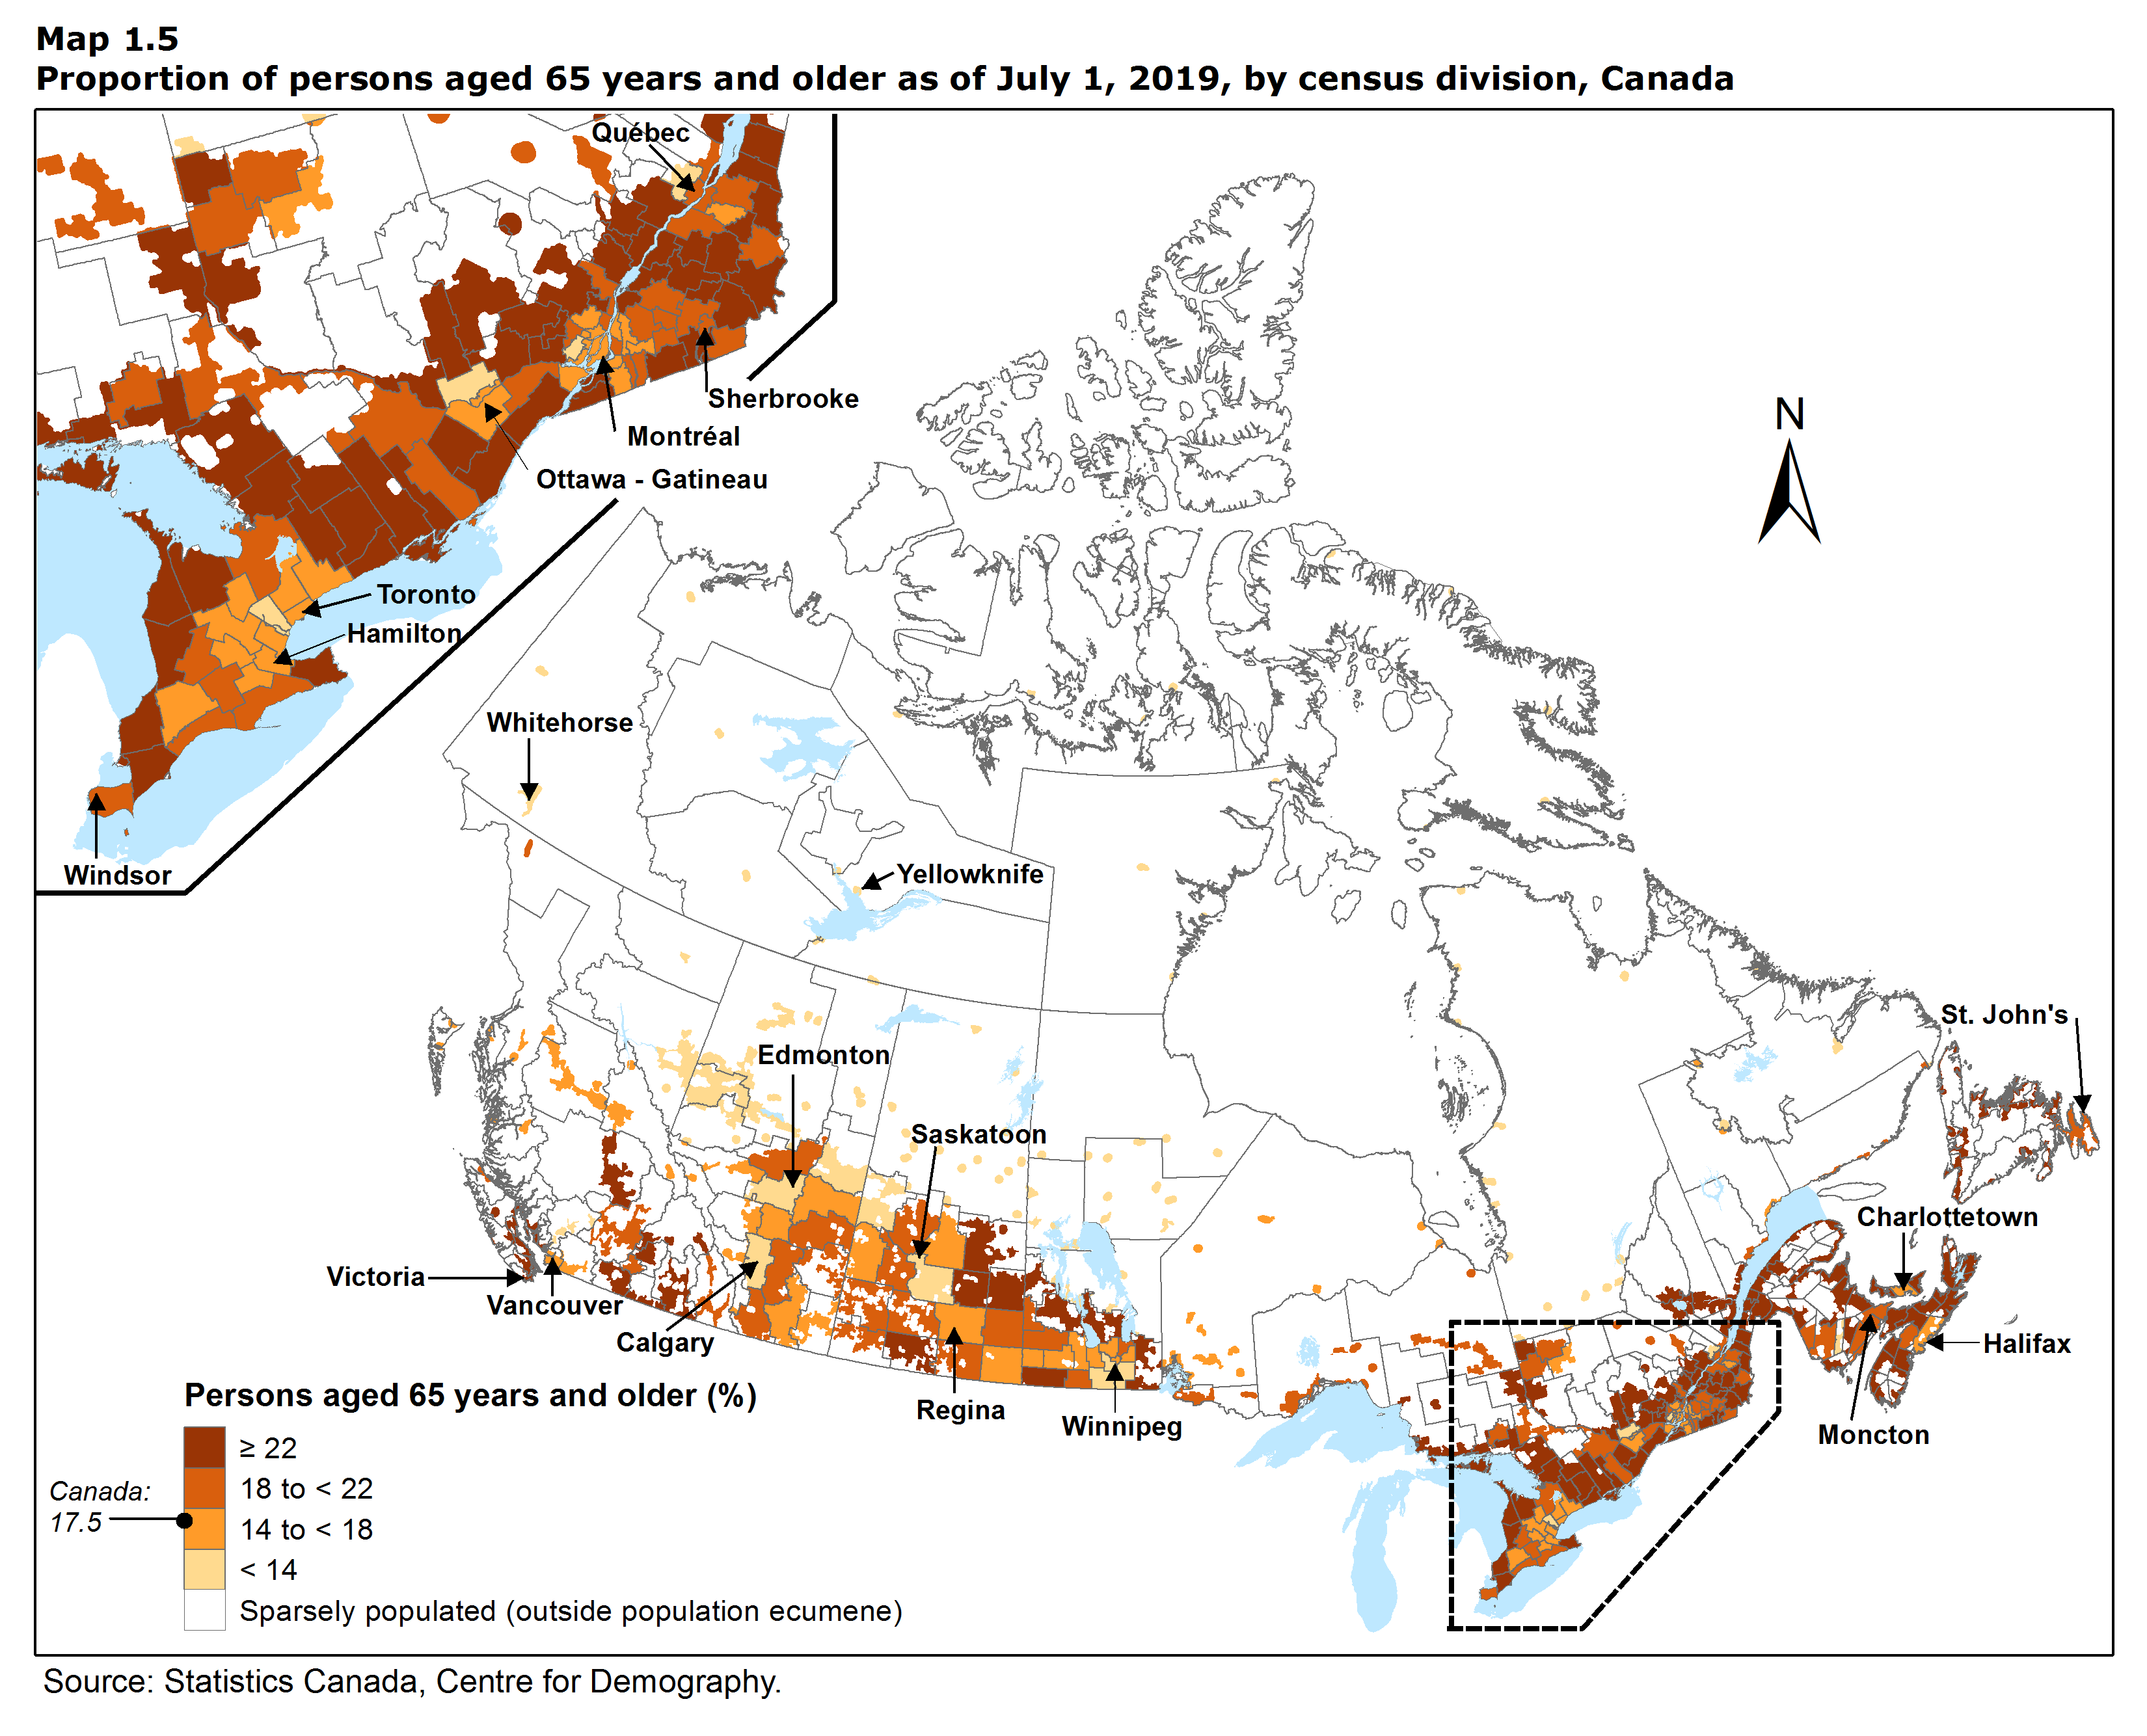 Map 1.5 Proportion of persons aged 65 years and older as of July 1, 2019, by census division, Canada 